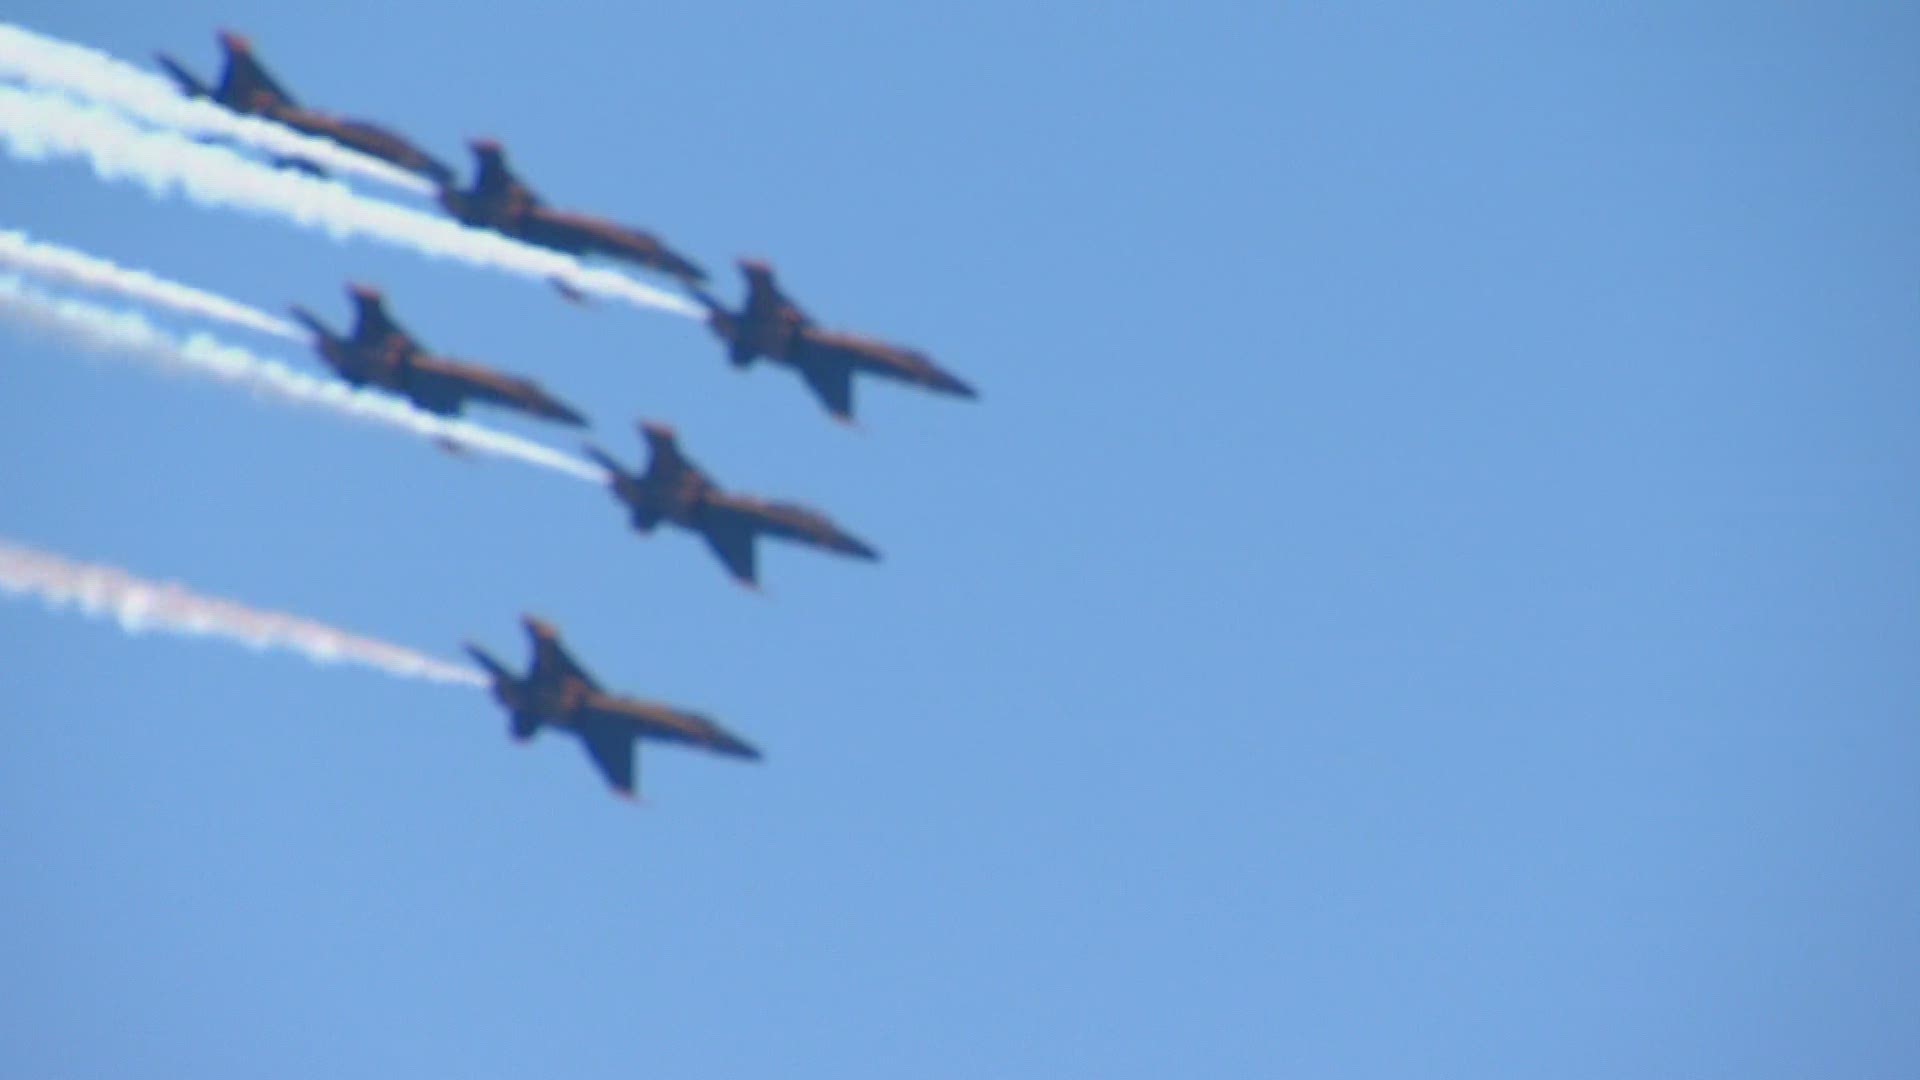 For 35 minutes on Wednesday, the Navy jets flew over North Texas to honor health care workers, first responders and other essential roles in the COVID-19 pandemic.